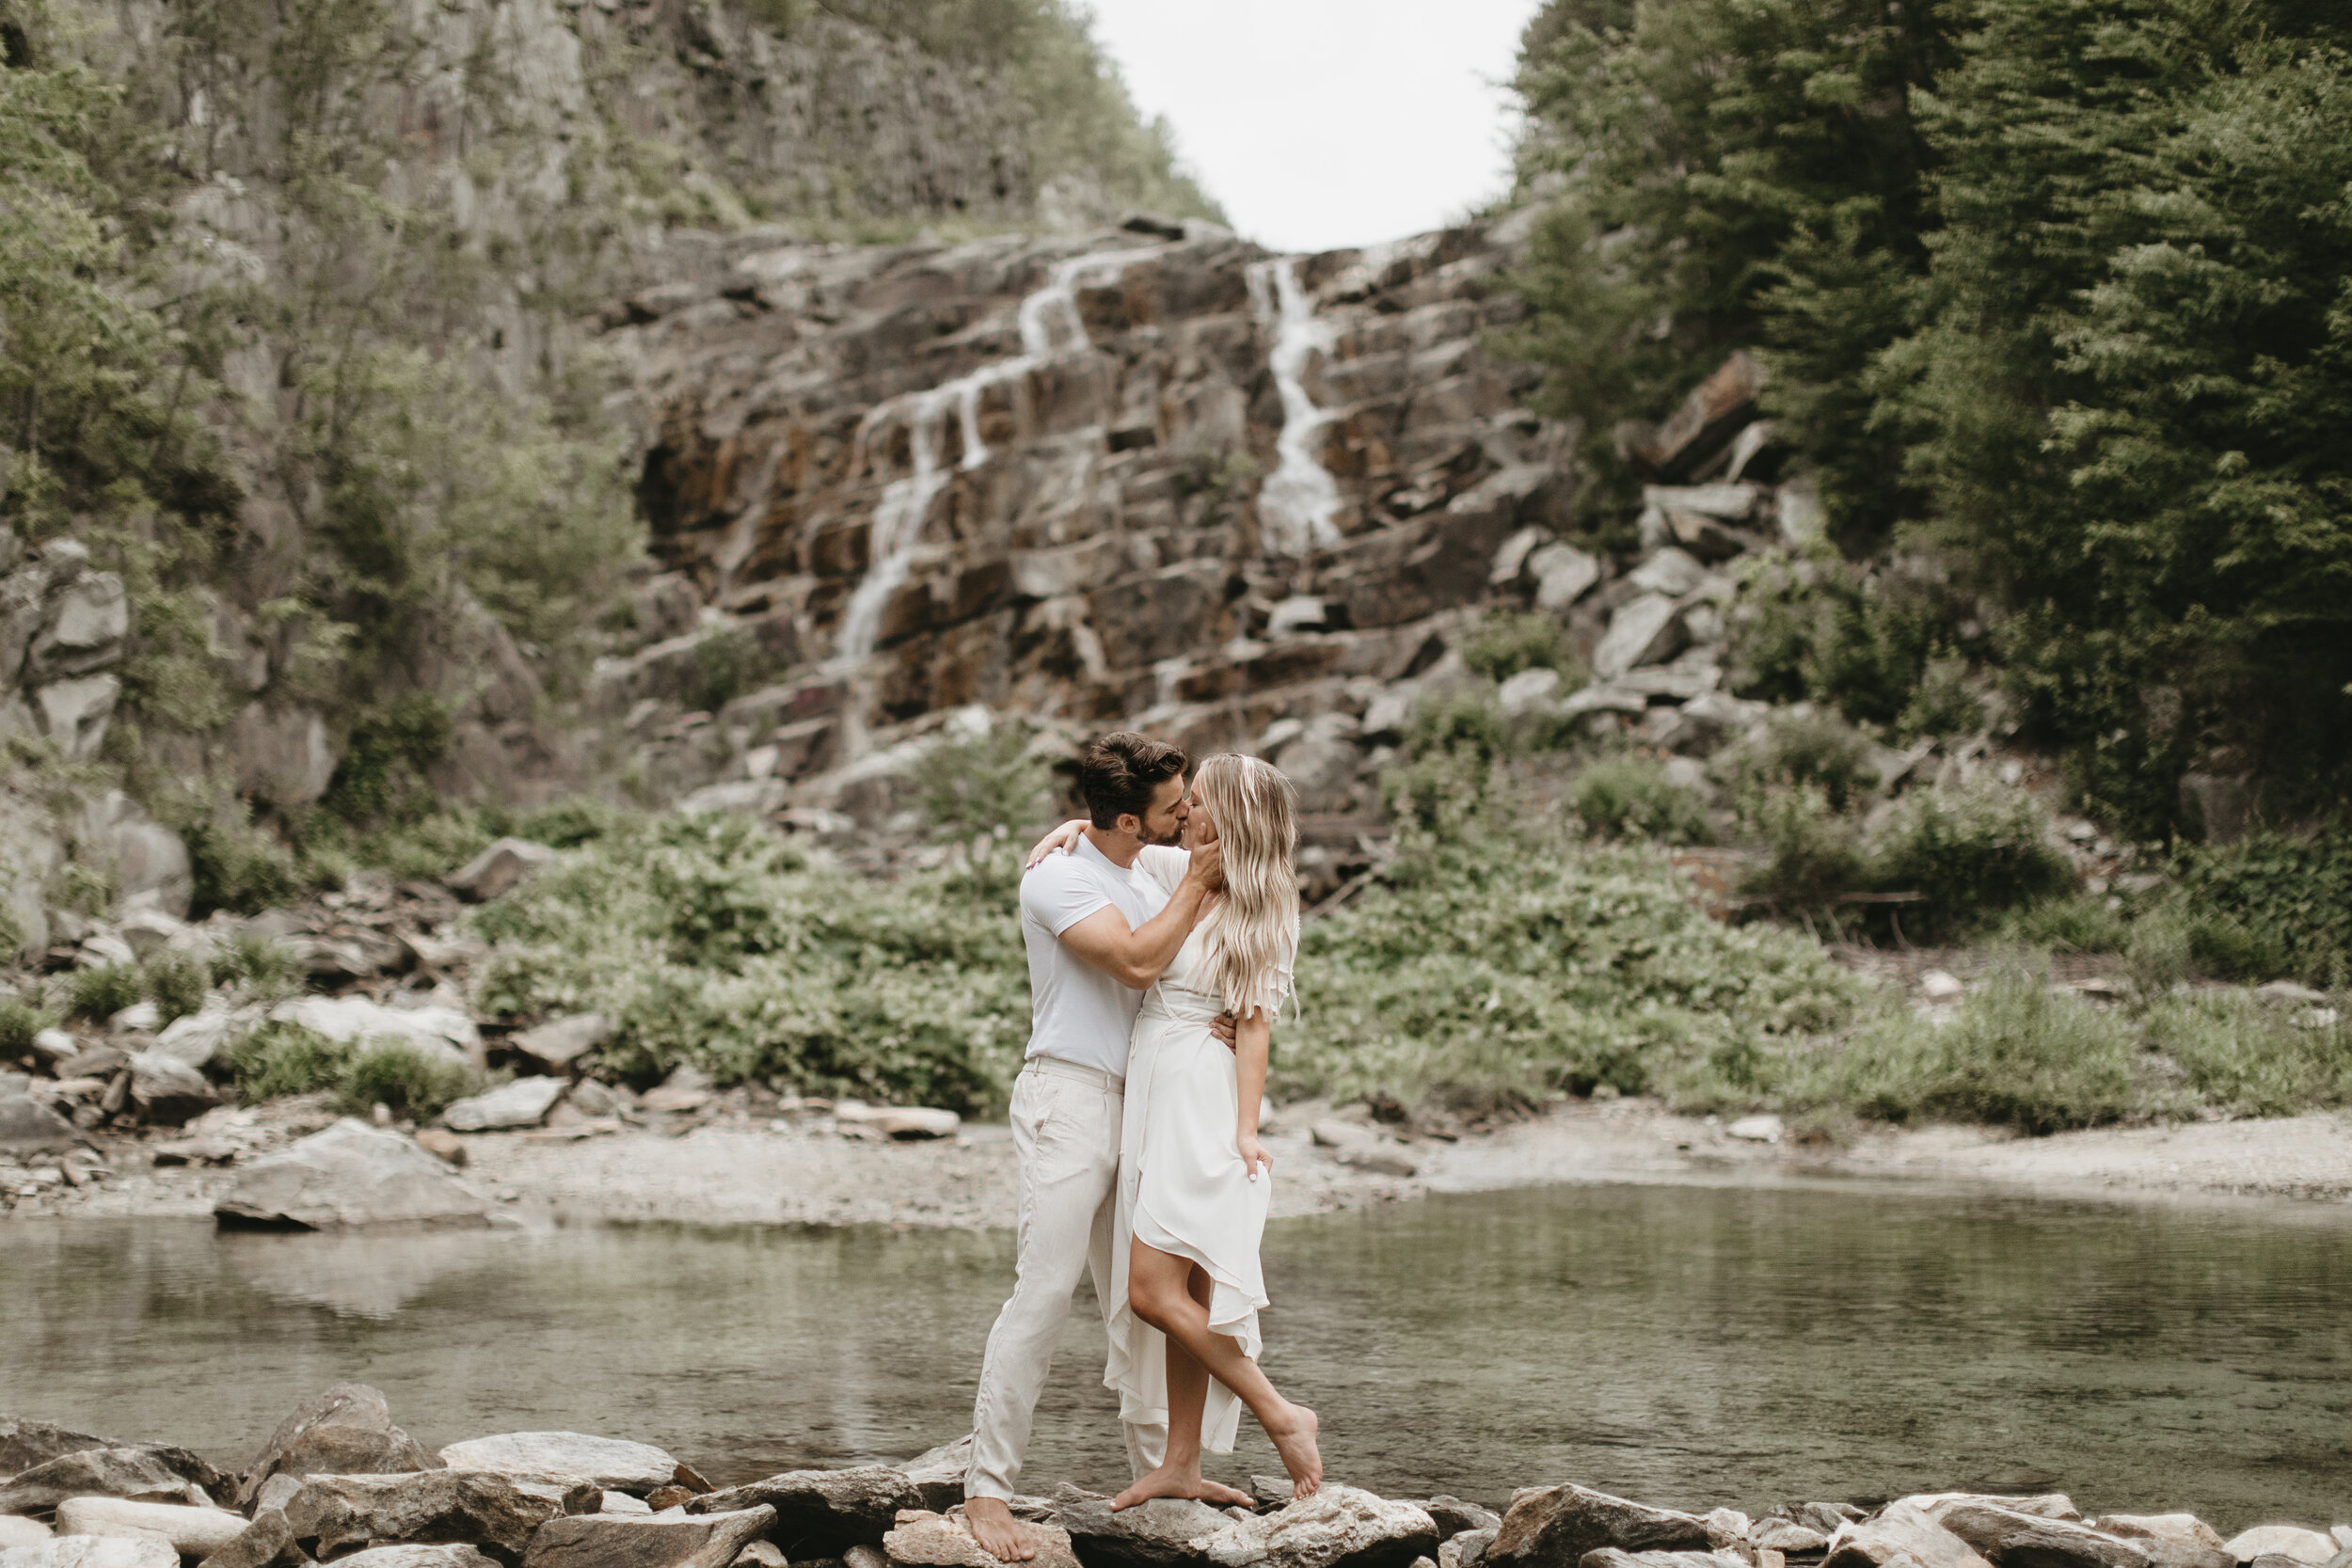 Nicole-Daacke-Photography-michaux-state-forest-elopement-adventure-engagement-session-pennsylvania-elopement-pa-elopement-photographer-gettysburg-photographer-state-park-elopement-engagement-session-pennsylvania-waterfall-163.jpg